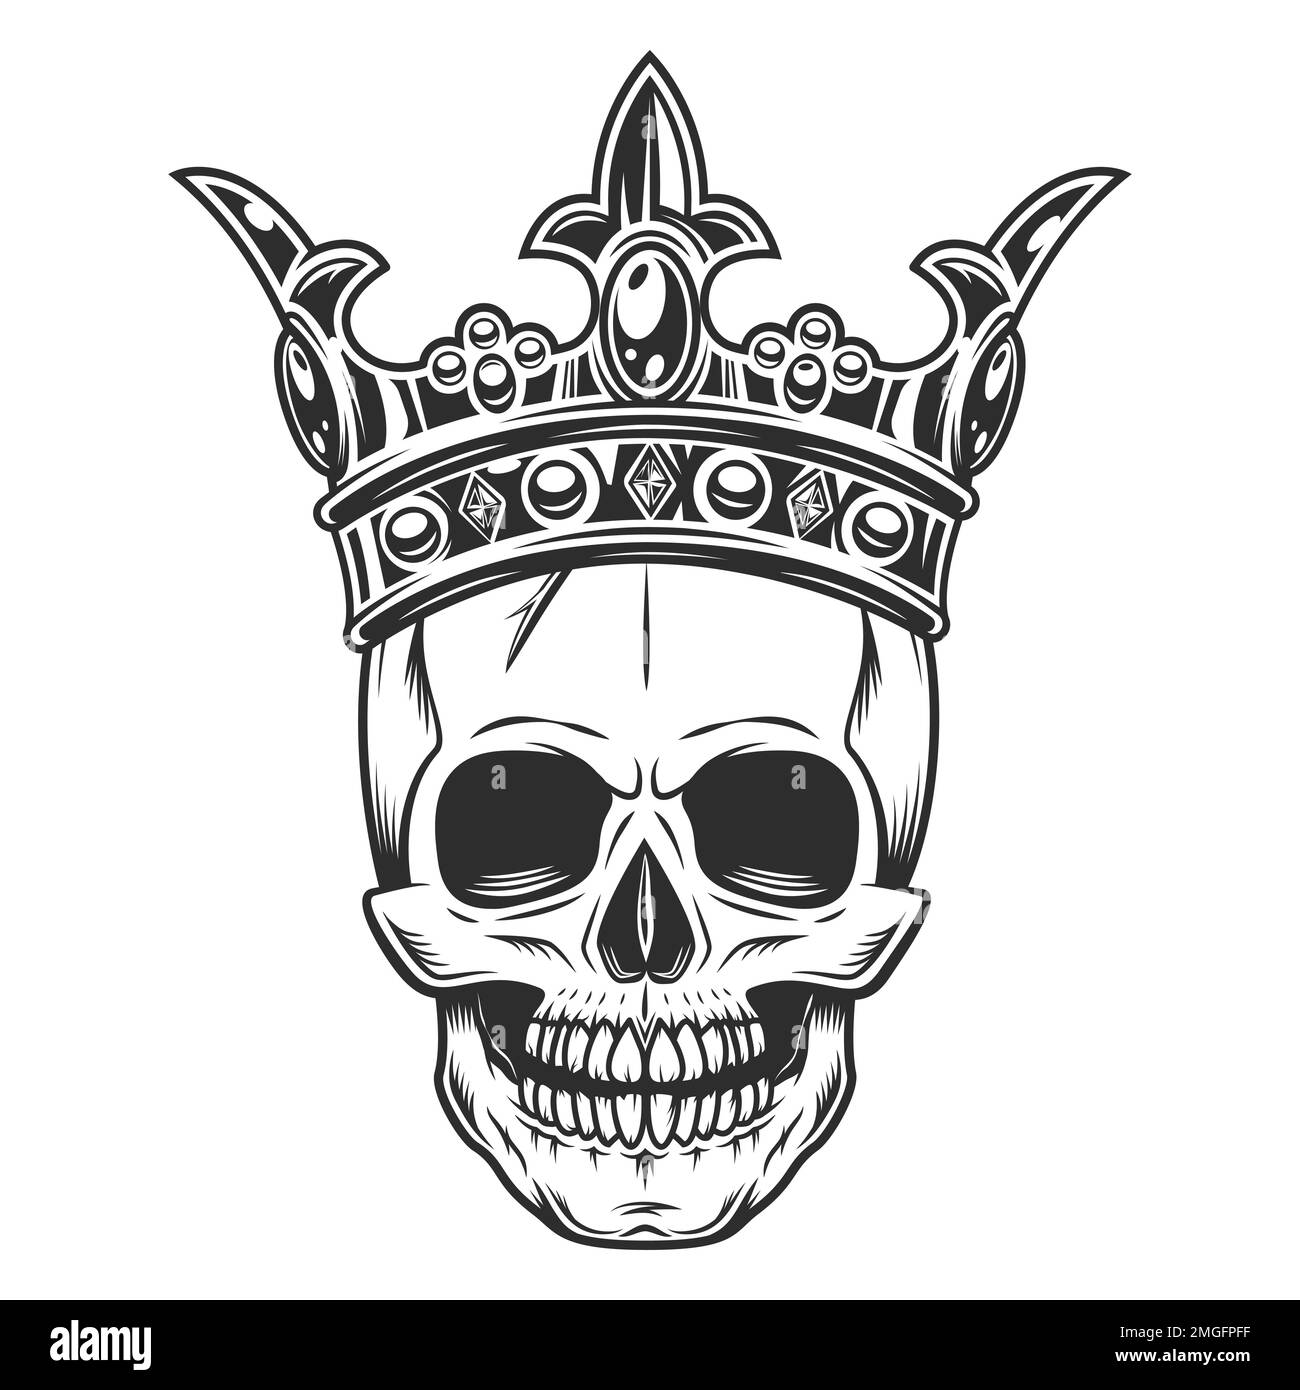 Skull in crown king monochrome illustration isolated on white background. Vintage crowning, elegant queen or king crowns, royal imperial coronation Stock Photo